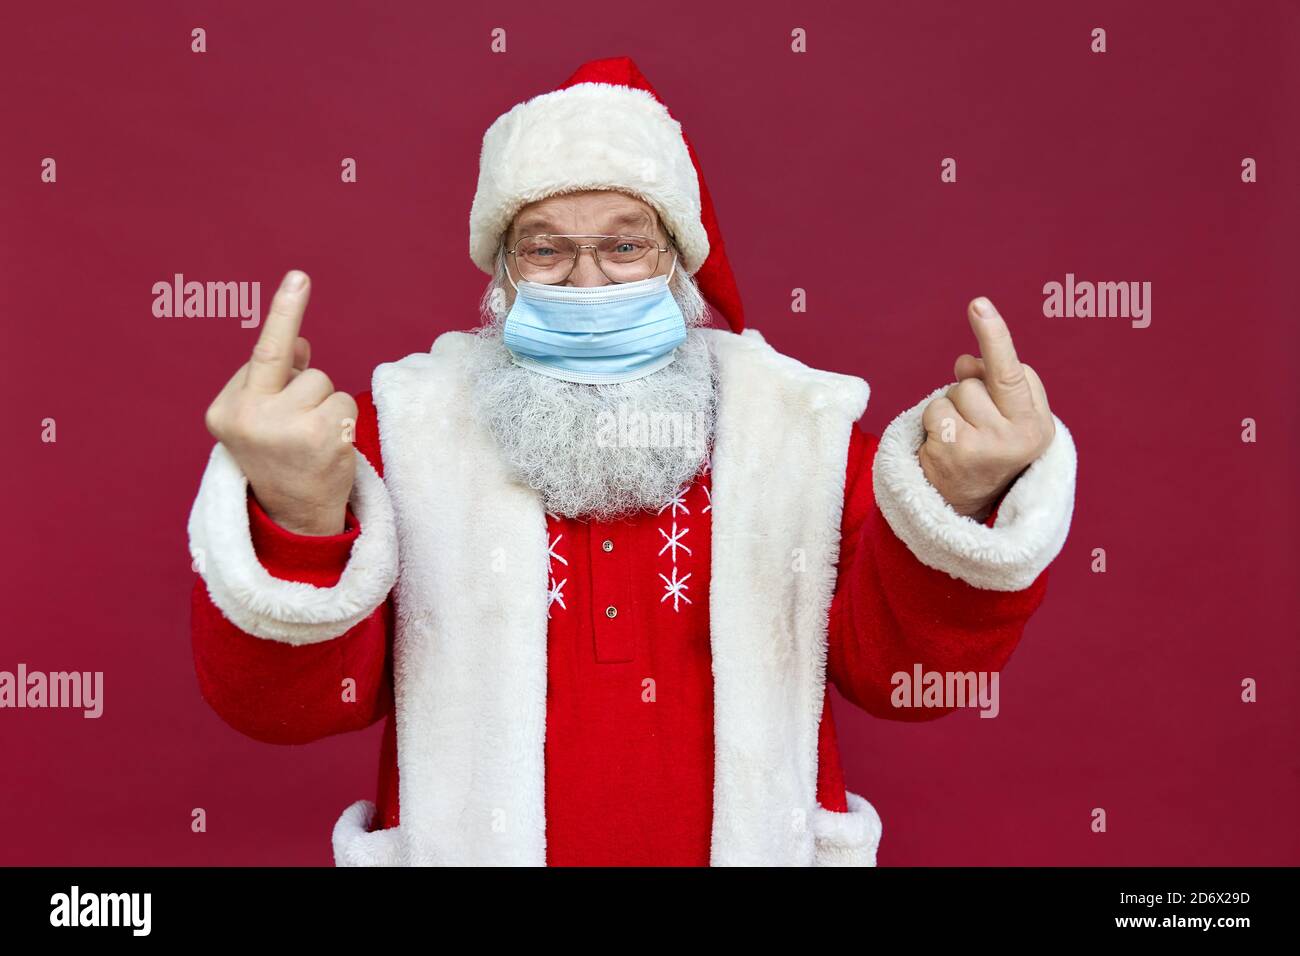 Santa Claus wearing face mask showing middle fingers on red background. Stock Photo